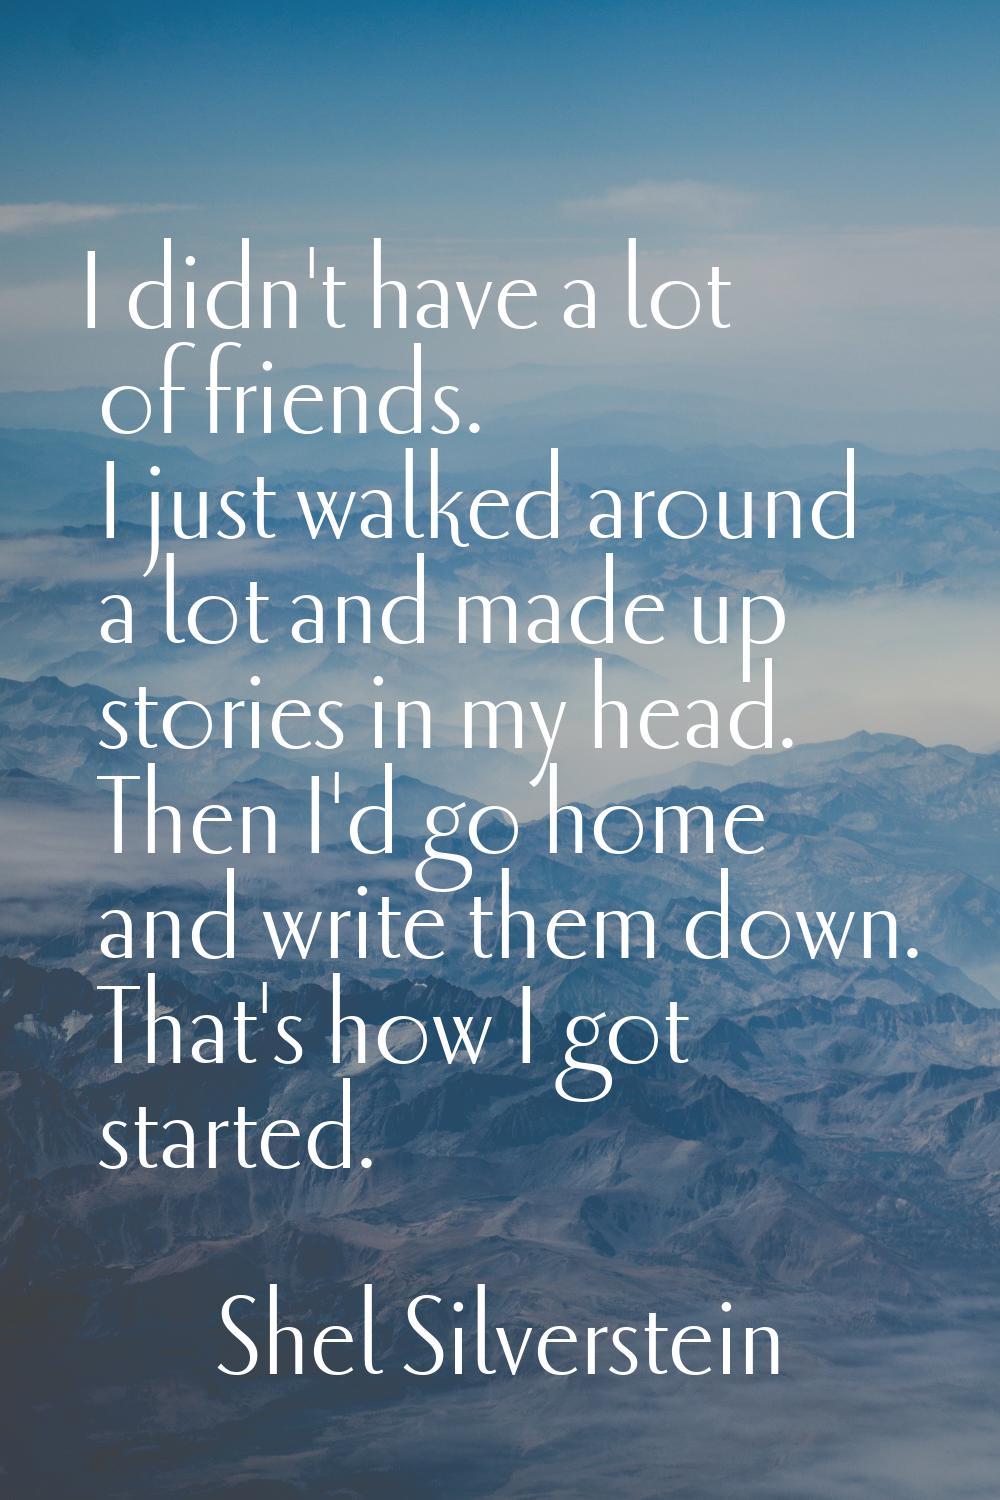 I didn't have a lot of friends. I just walked around a lot and made up stories in my head. Then I'd